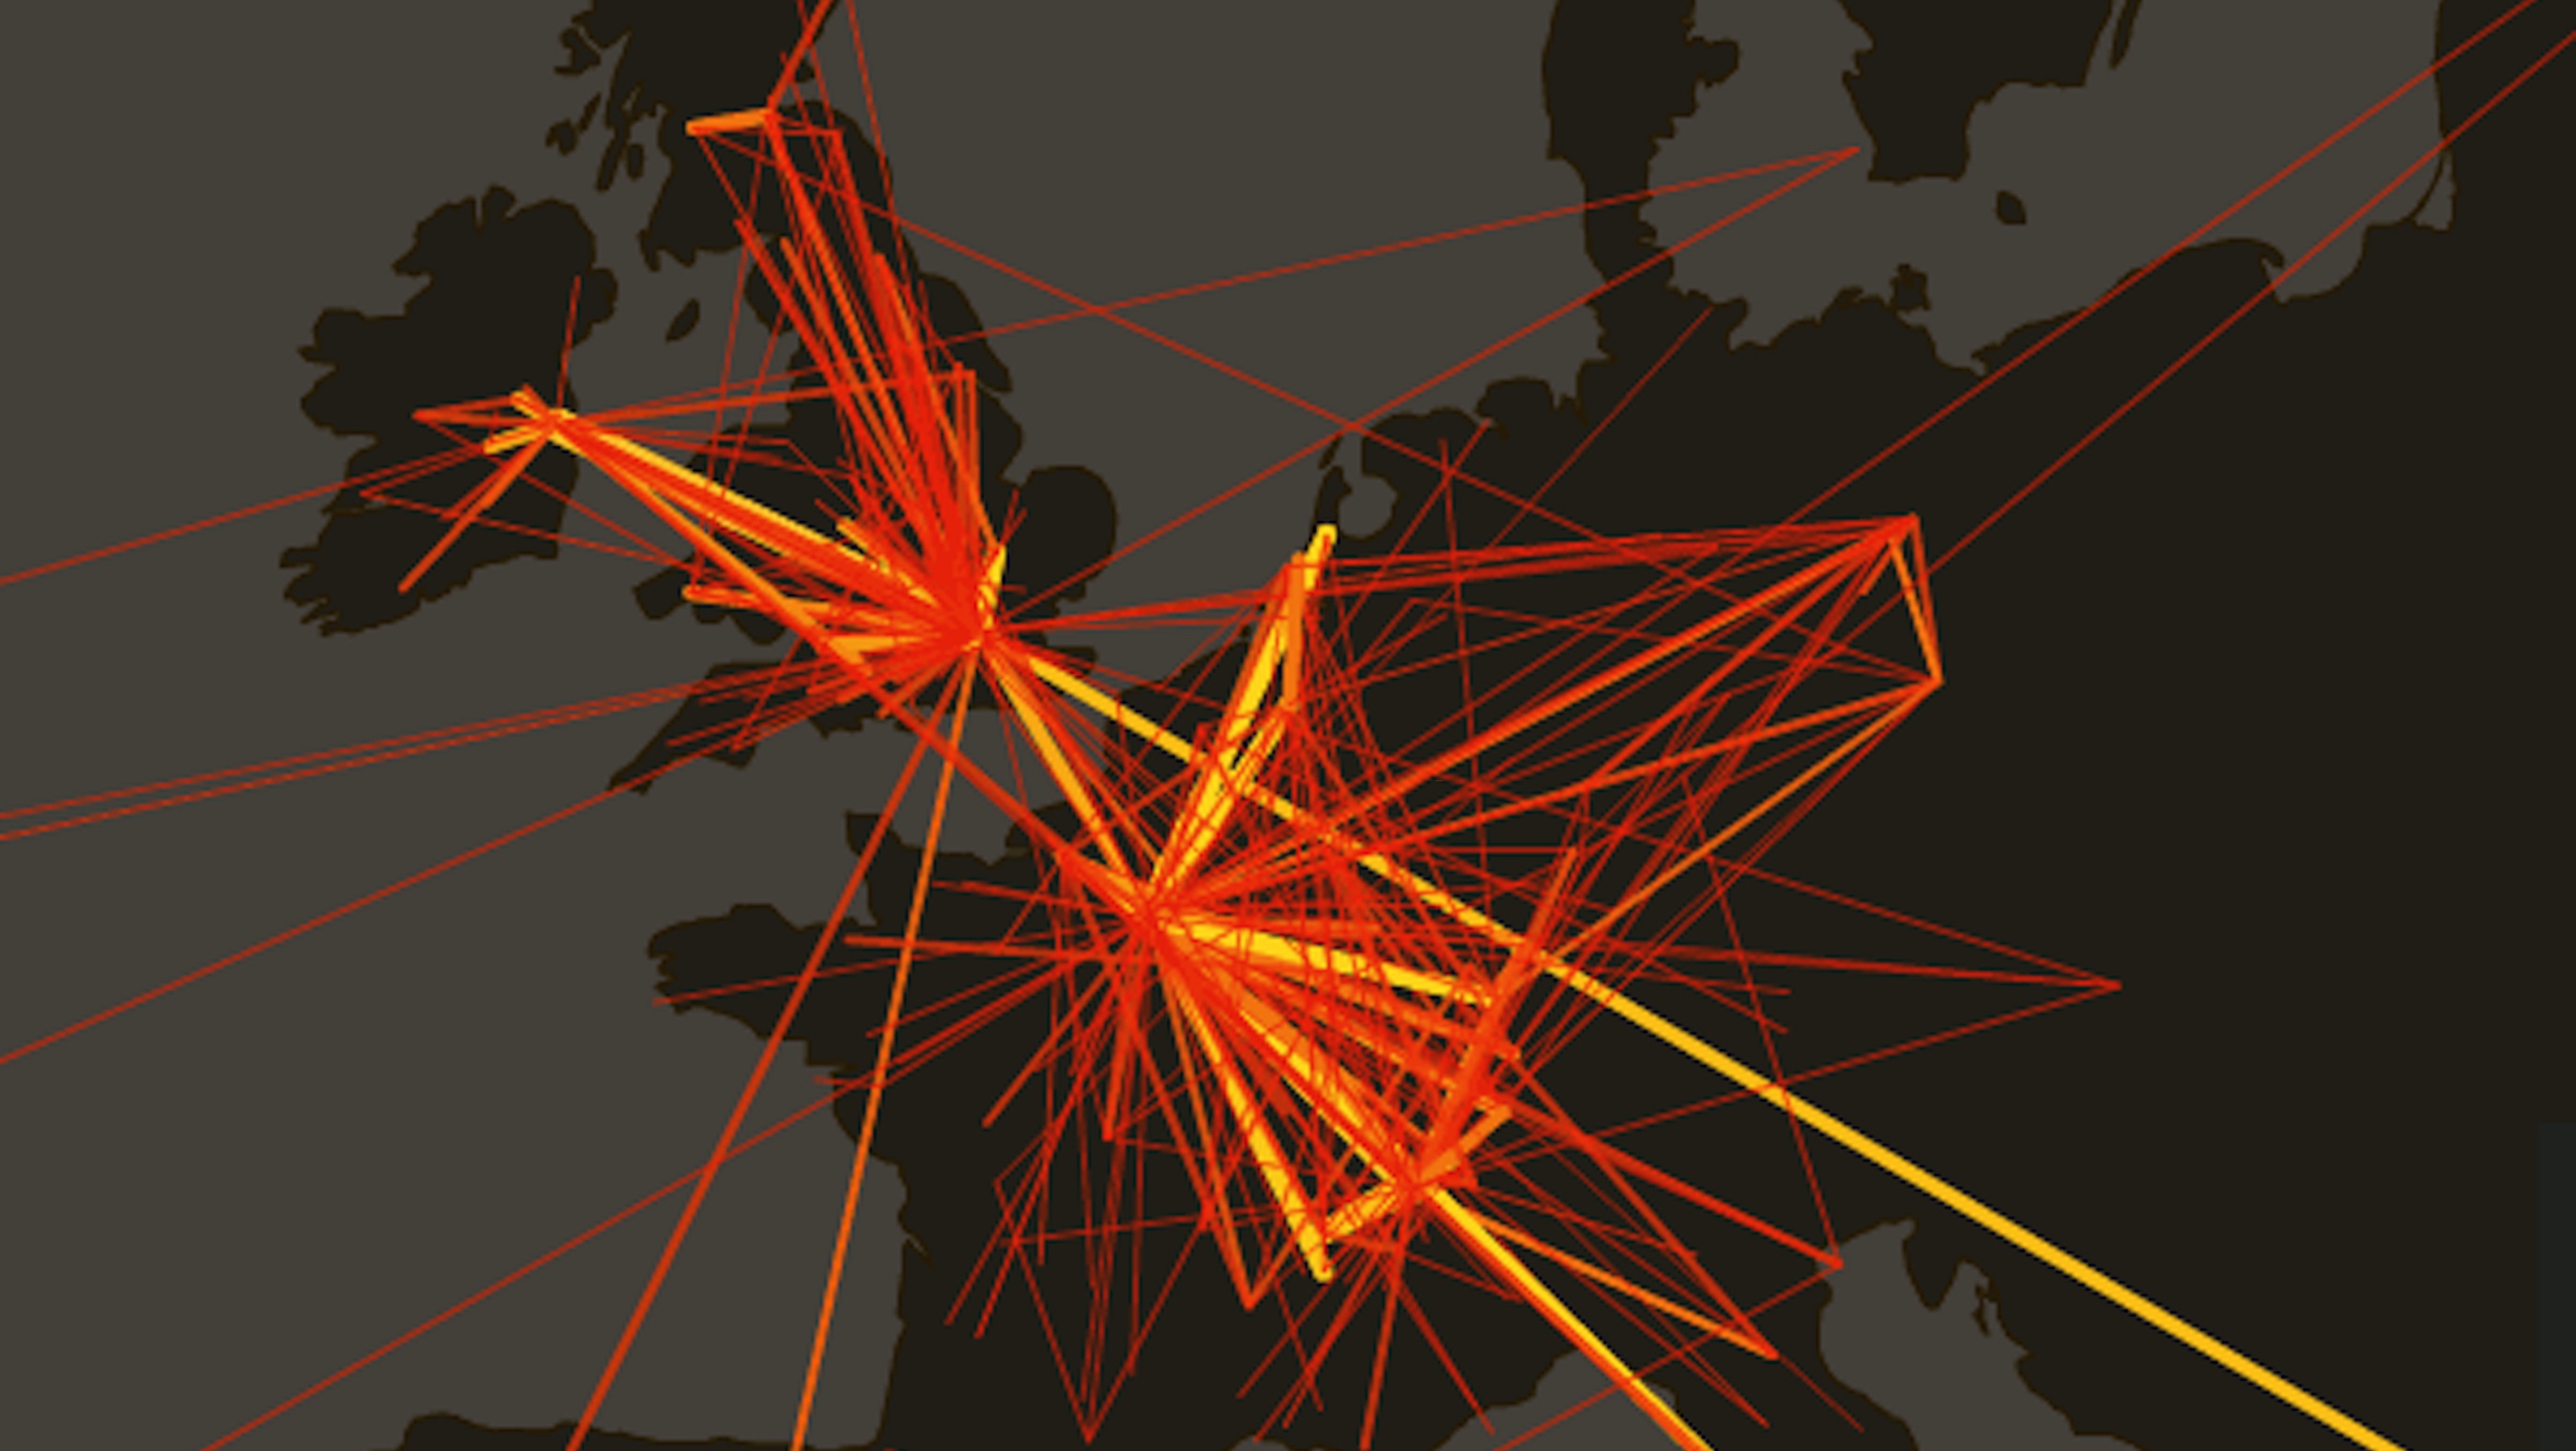 A graphical representation of network connections superimposed on a dark map, highlighting major nodes with bright orange and yellow lines.